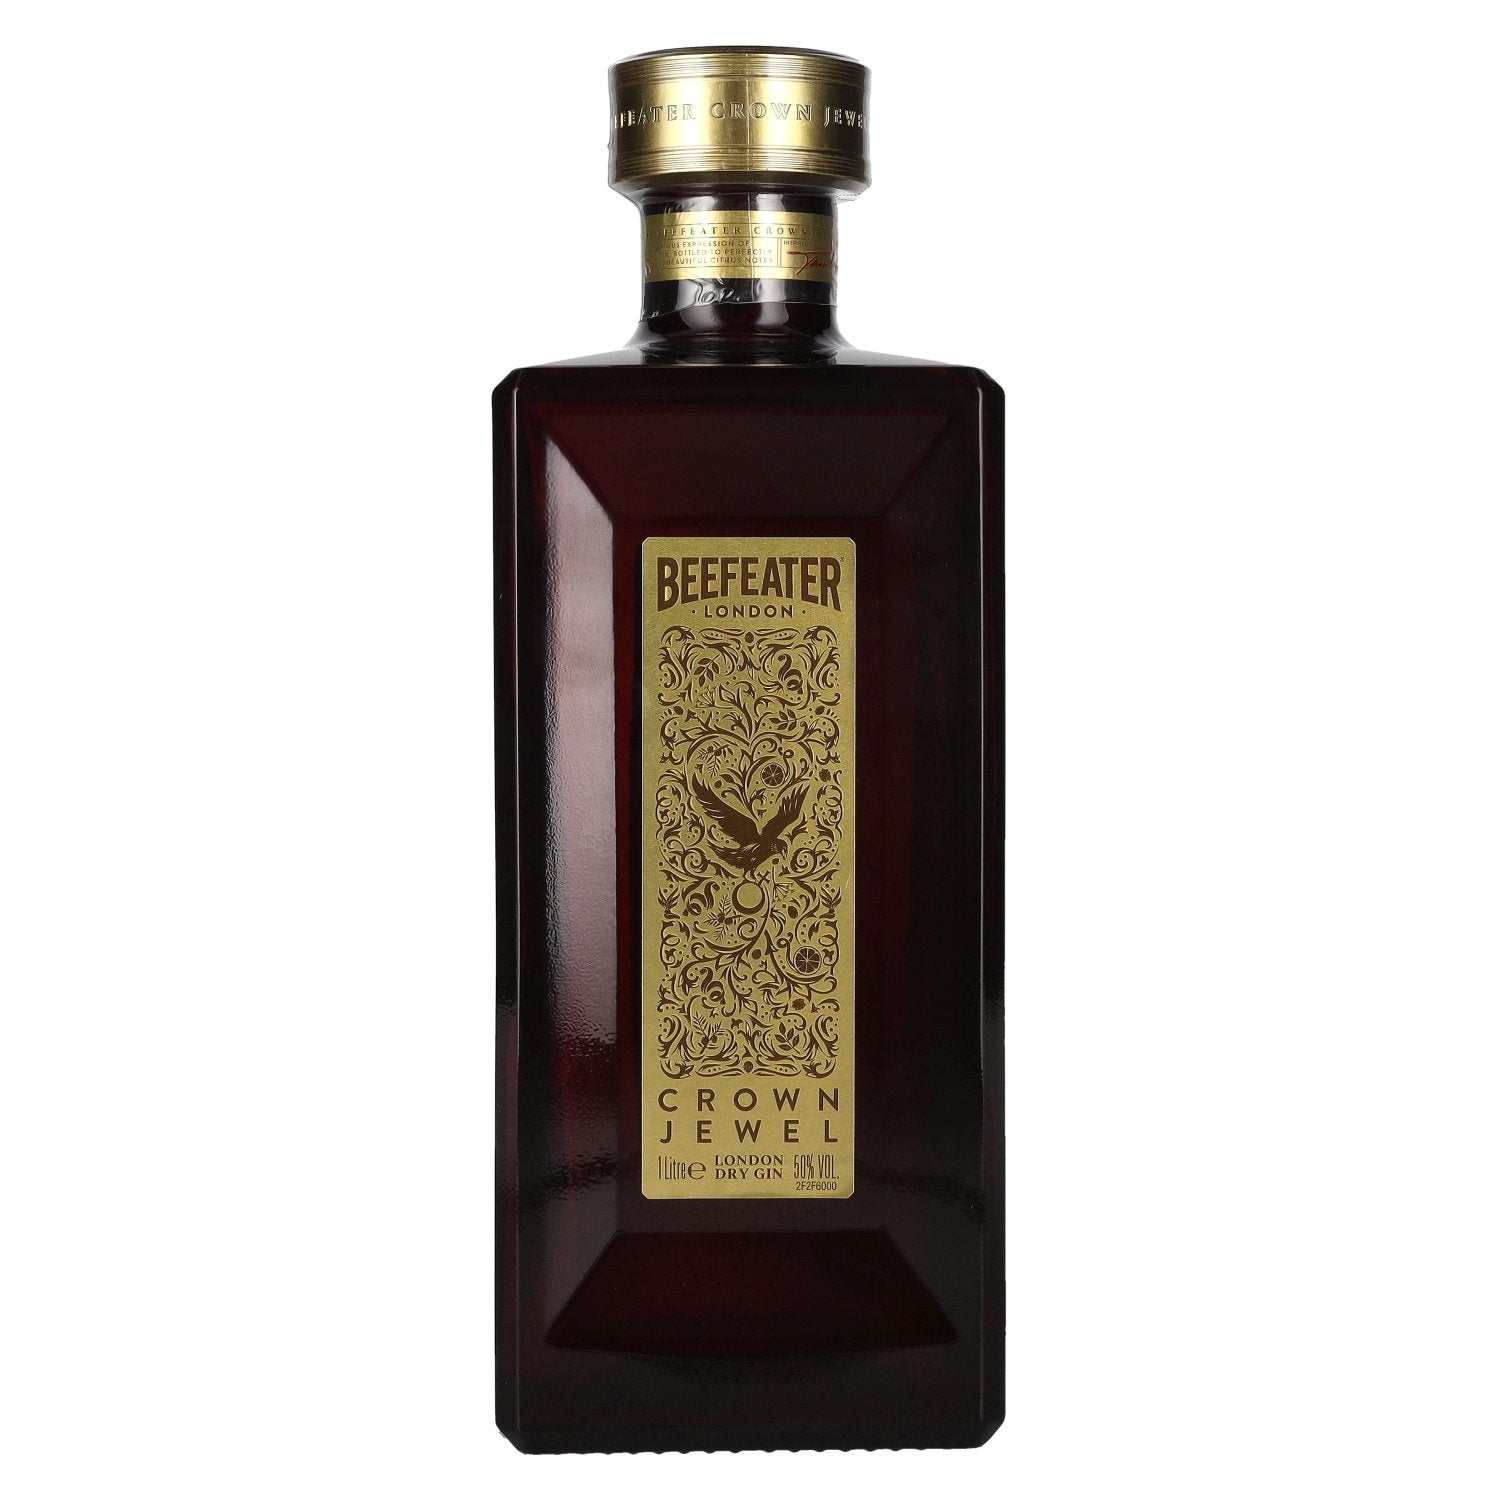 Beefeater Crown Jewel London Dry Gin 50% Vol. 1l